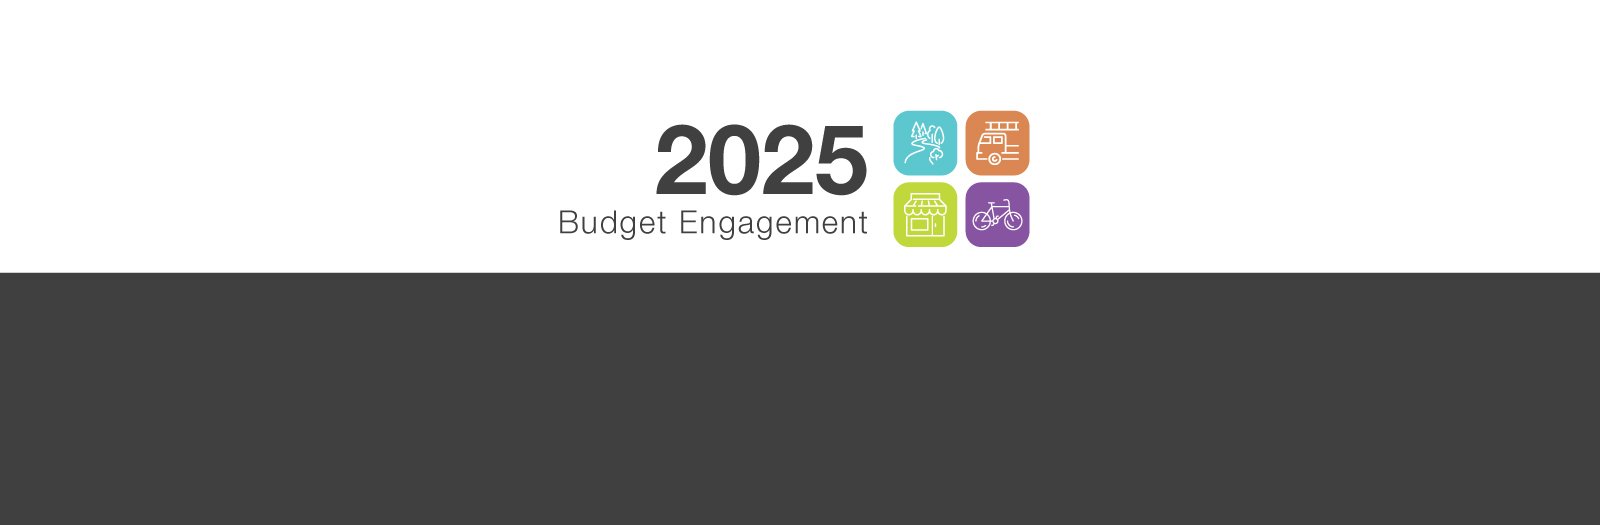 "2025 Budget Engagement in grey beside four icons: a windy path bordered by trees on a blue background, the front of a fire truck on a red-orange background, a store front on a green background and a bicycle on a purple background."